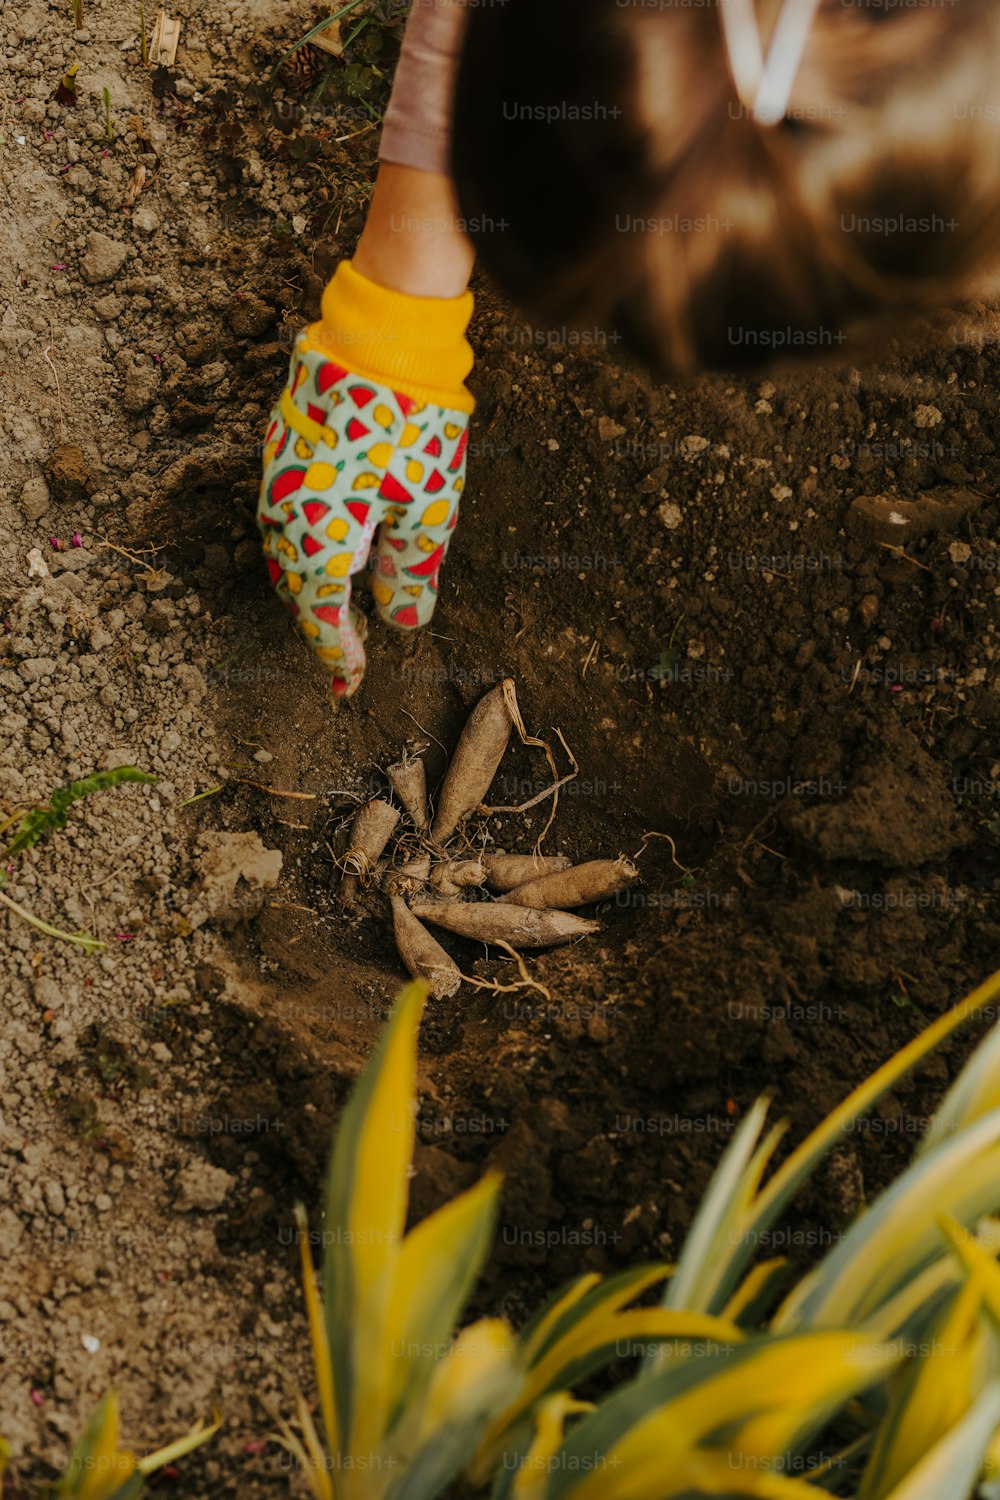 a person digging in the dirt with a pair of gardening gloves